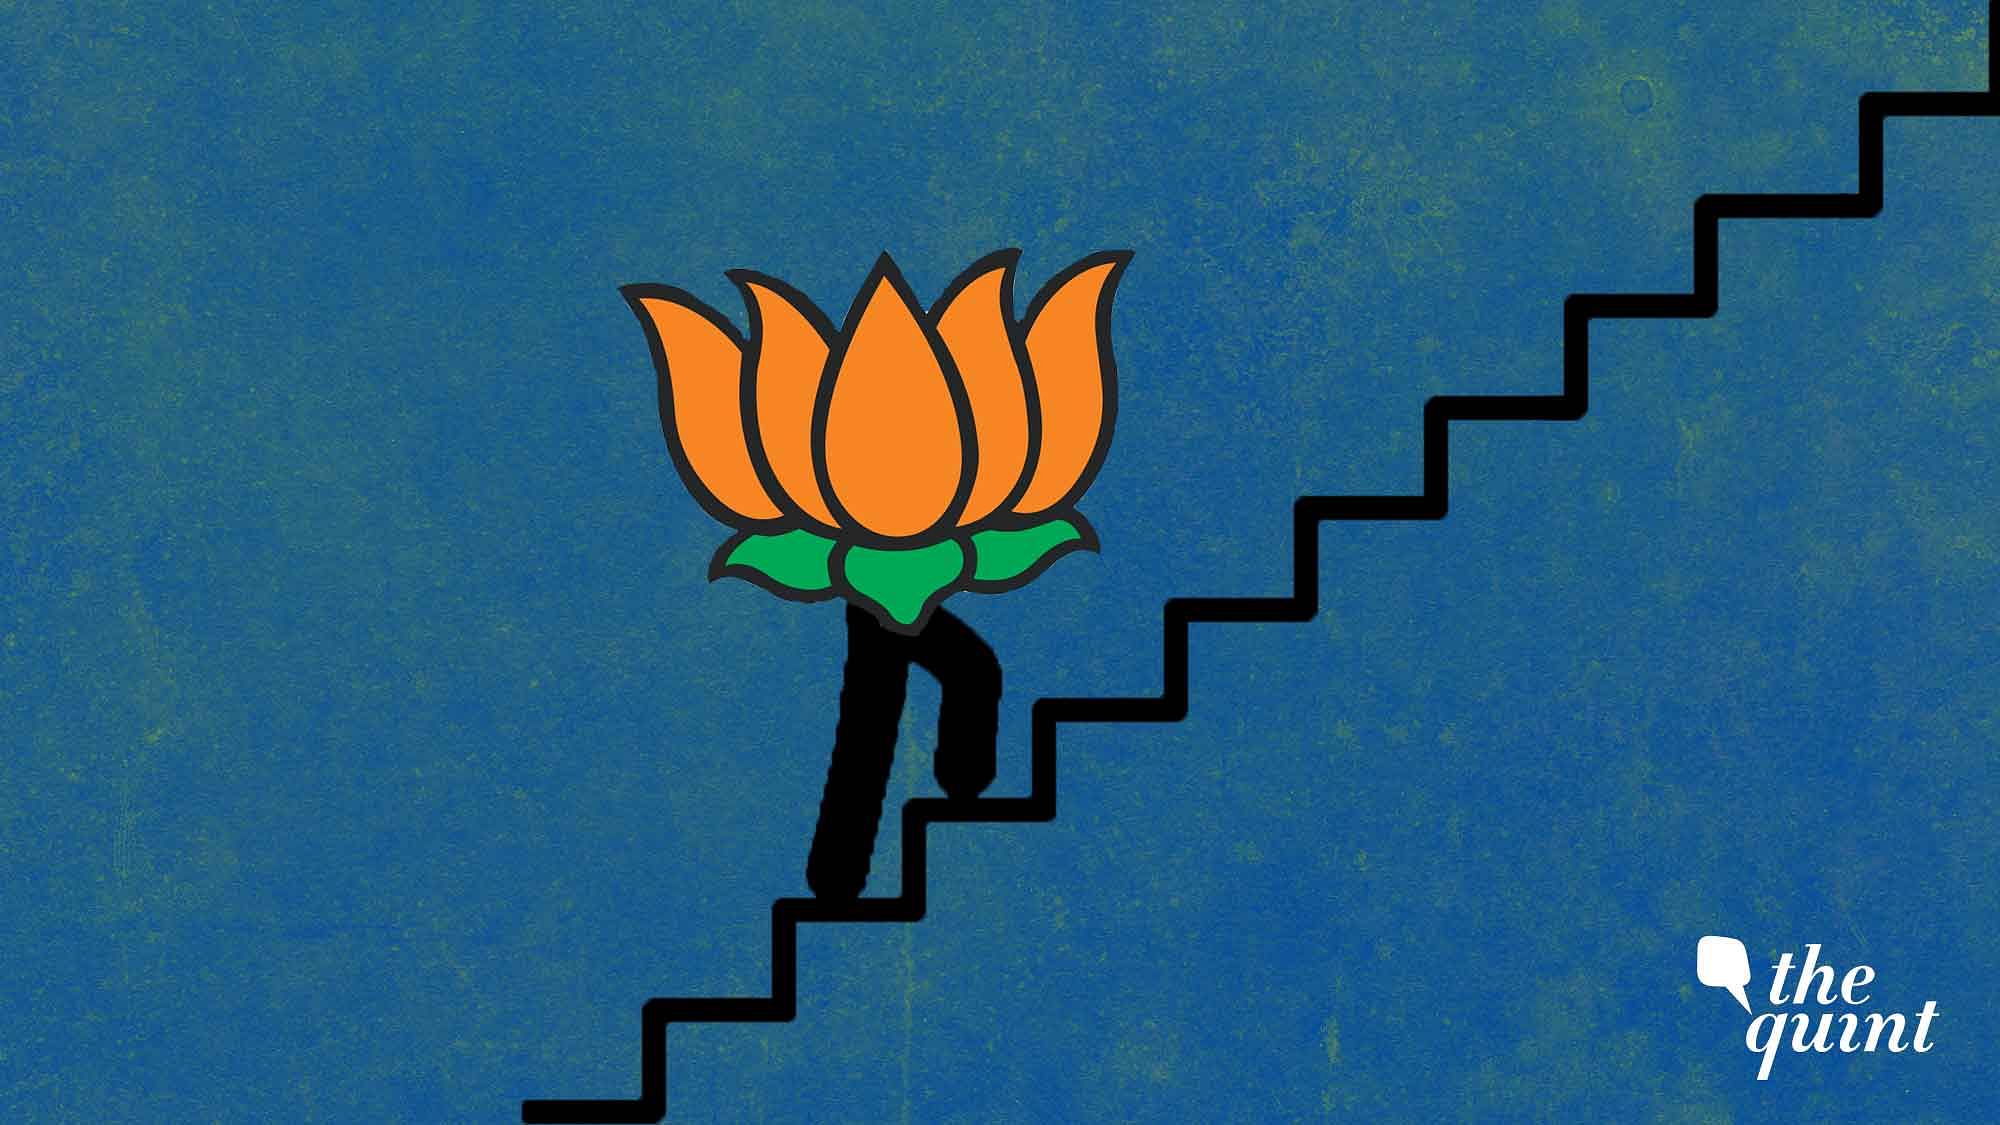 Even if Modi is re-elected in 2019, control of both Houses will remain a distant dream for his entire term.